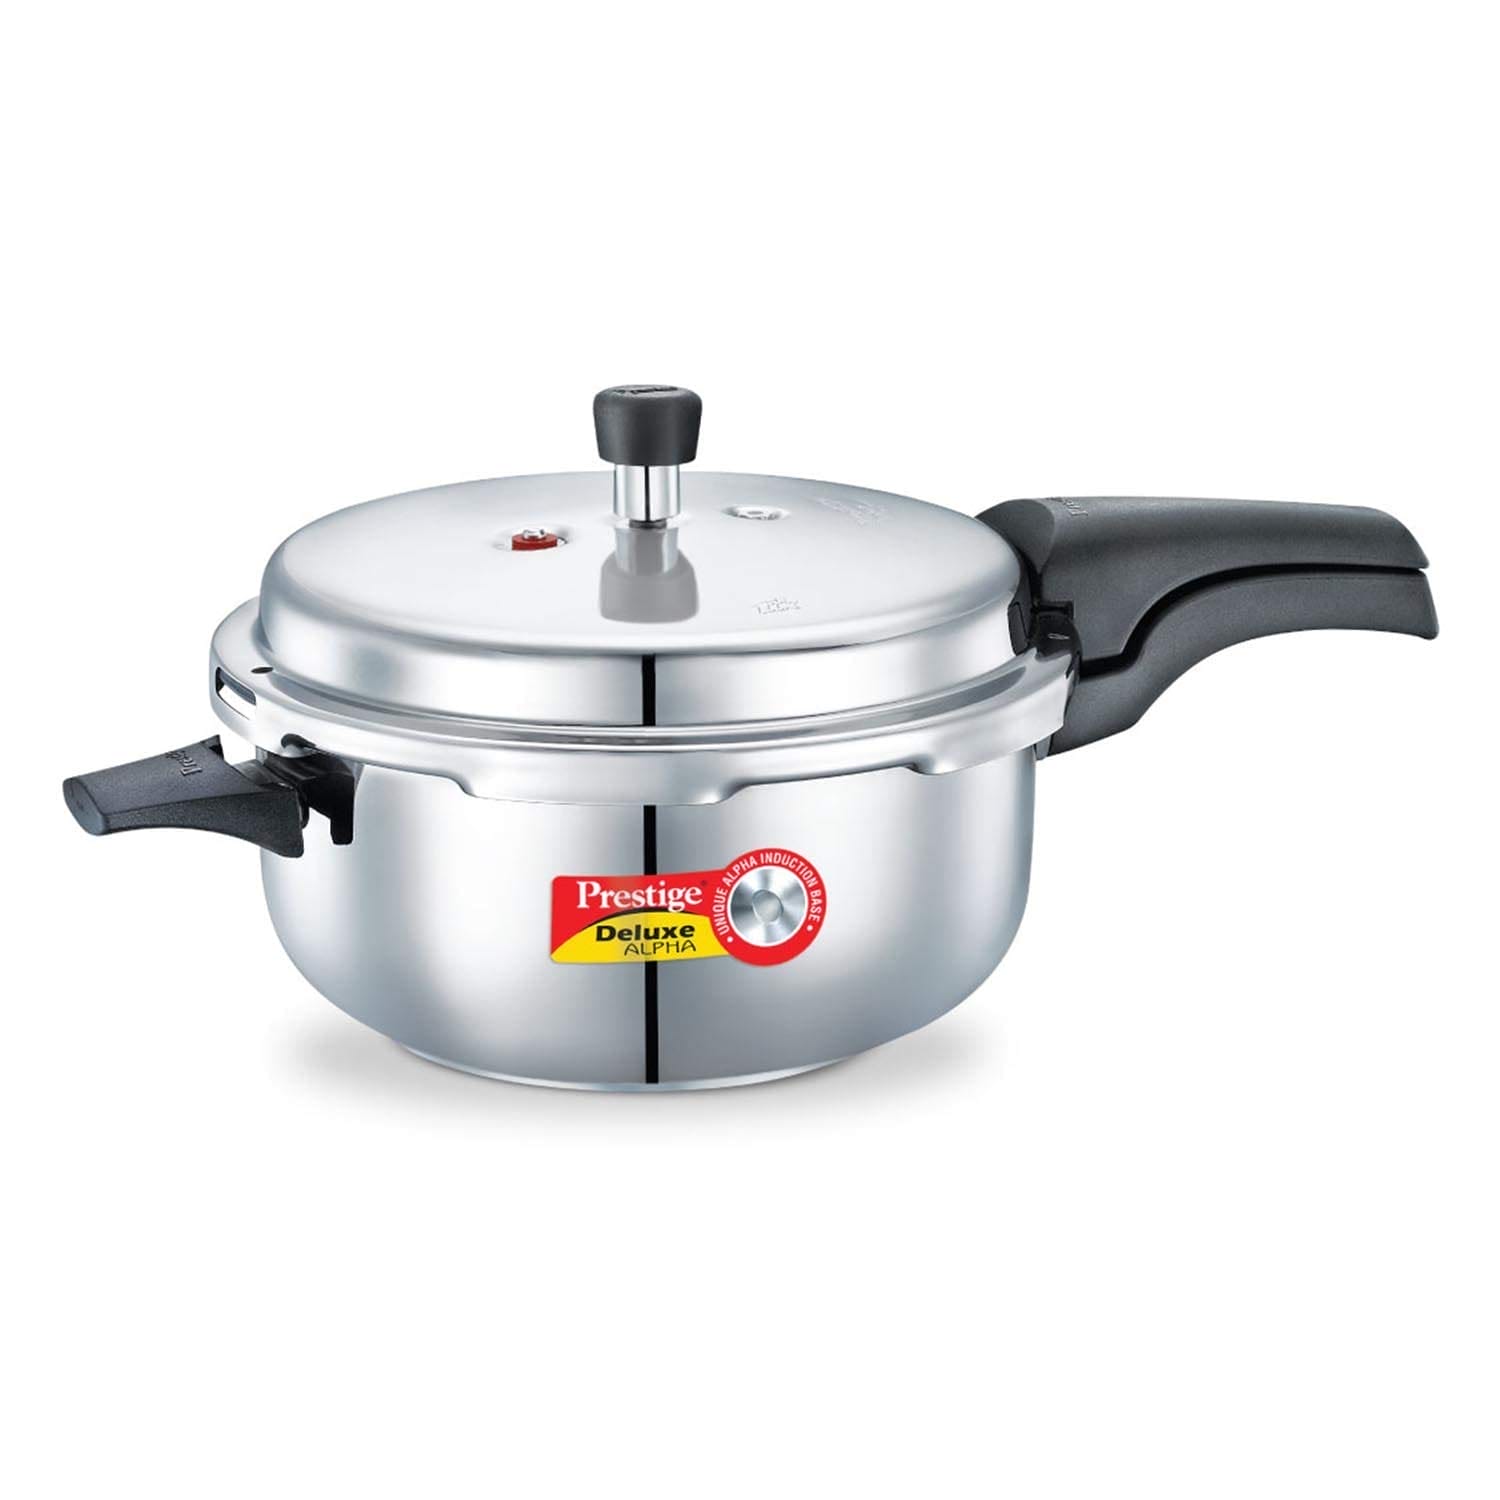 10 best stainless steel pressure cookers tested reviewed 1145 26 7